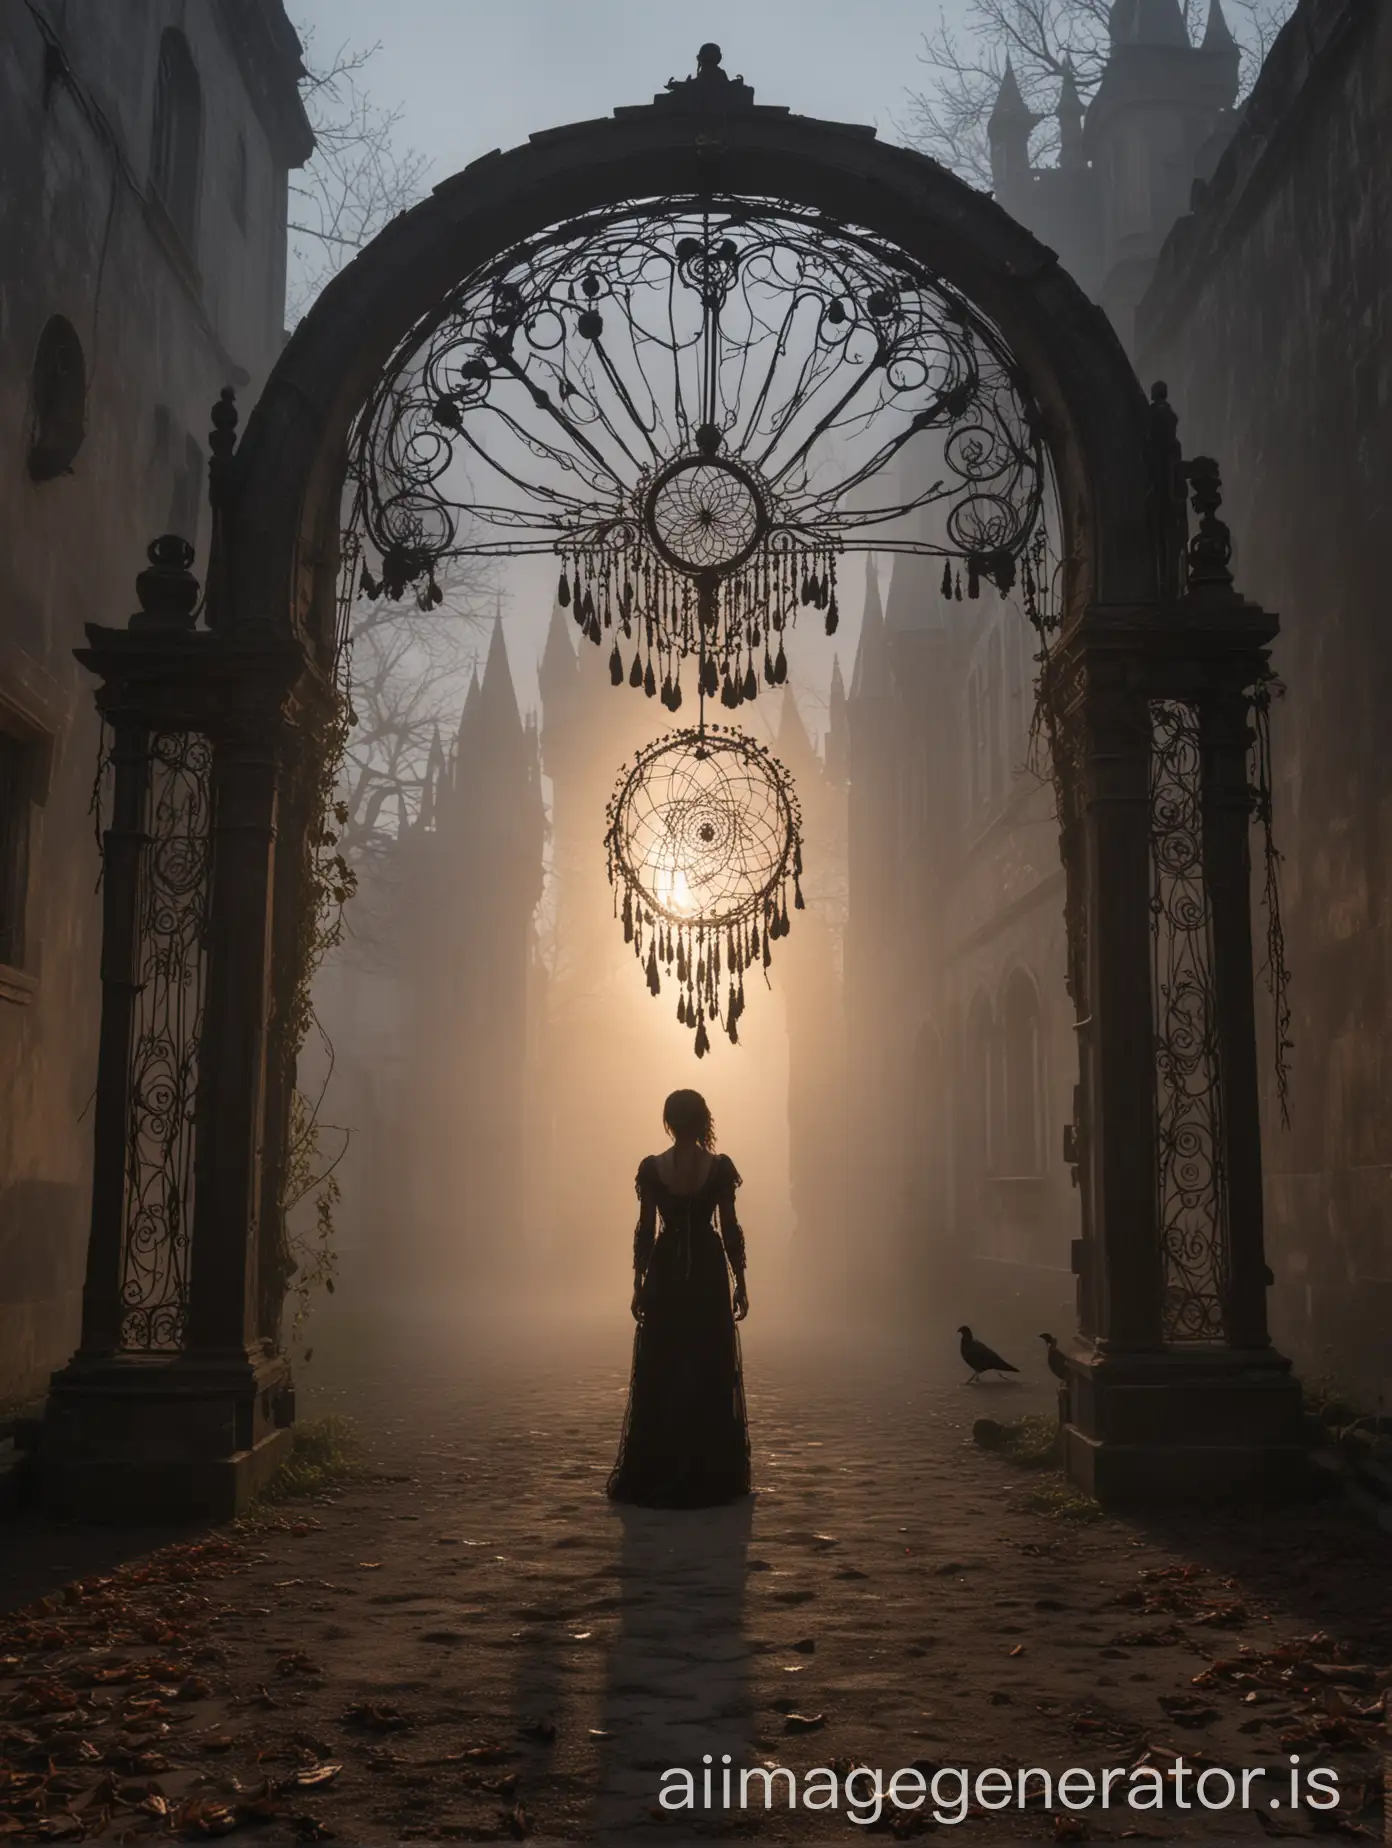 Mysterious-Woman-in-NeoGothic-Castle-Courtyard-with-Dream-Catcher-at-Sunset